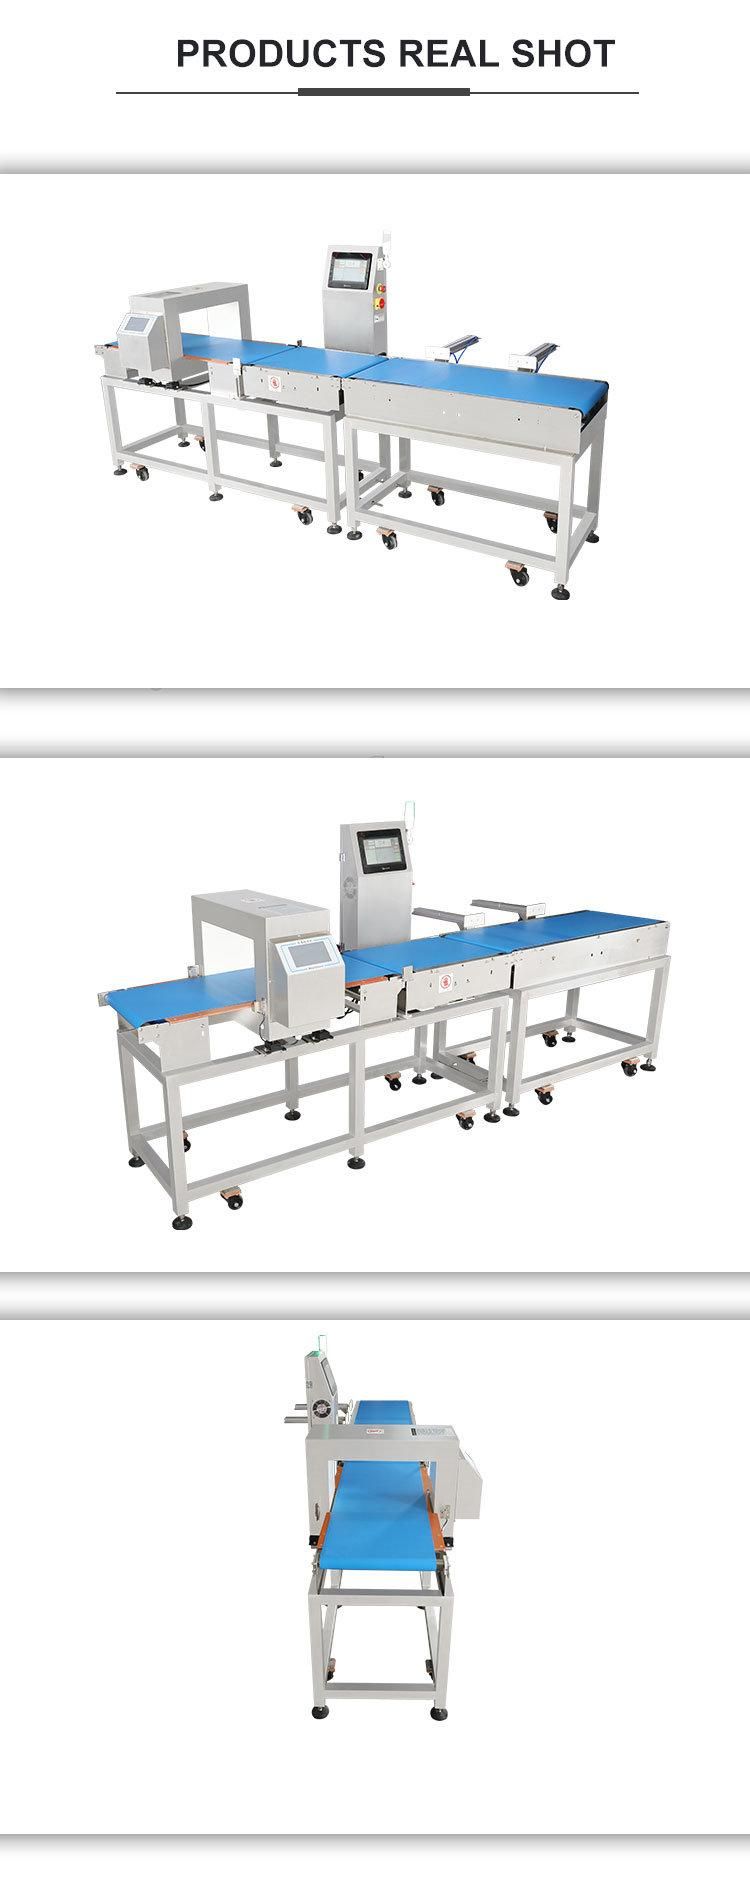 Combination System of Checkweigher and Metal Detector in Food Industry